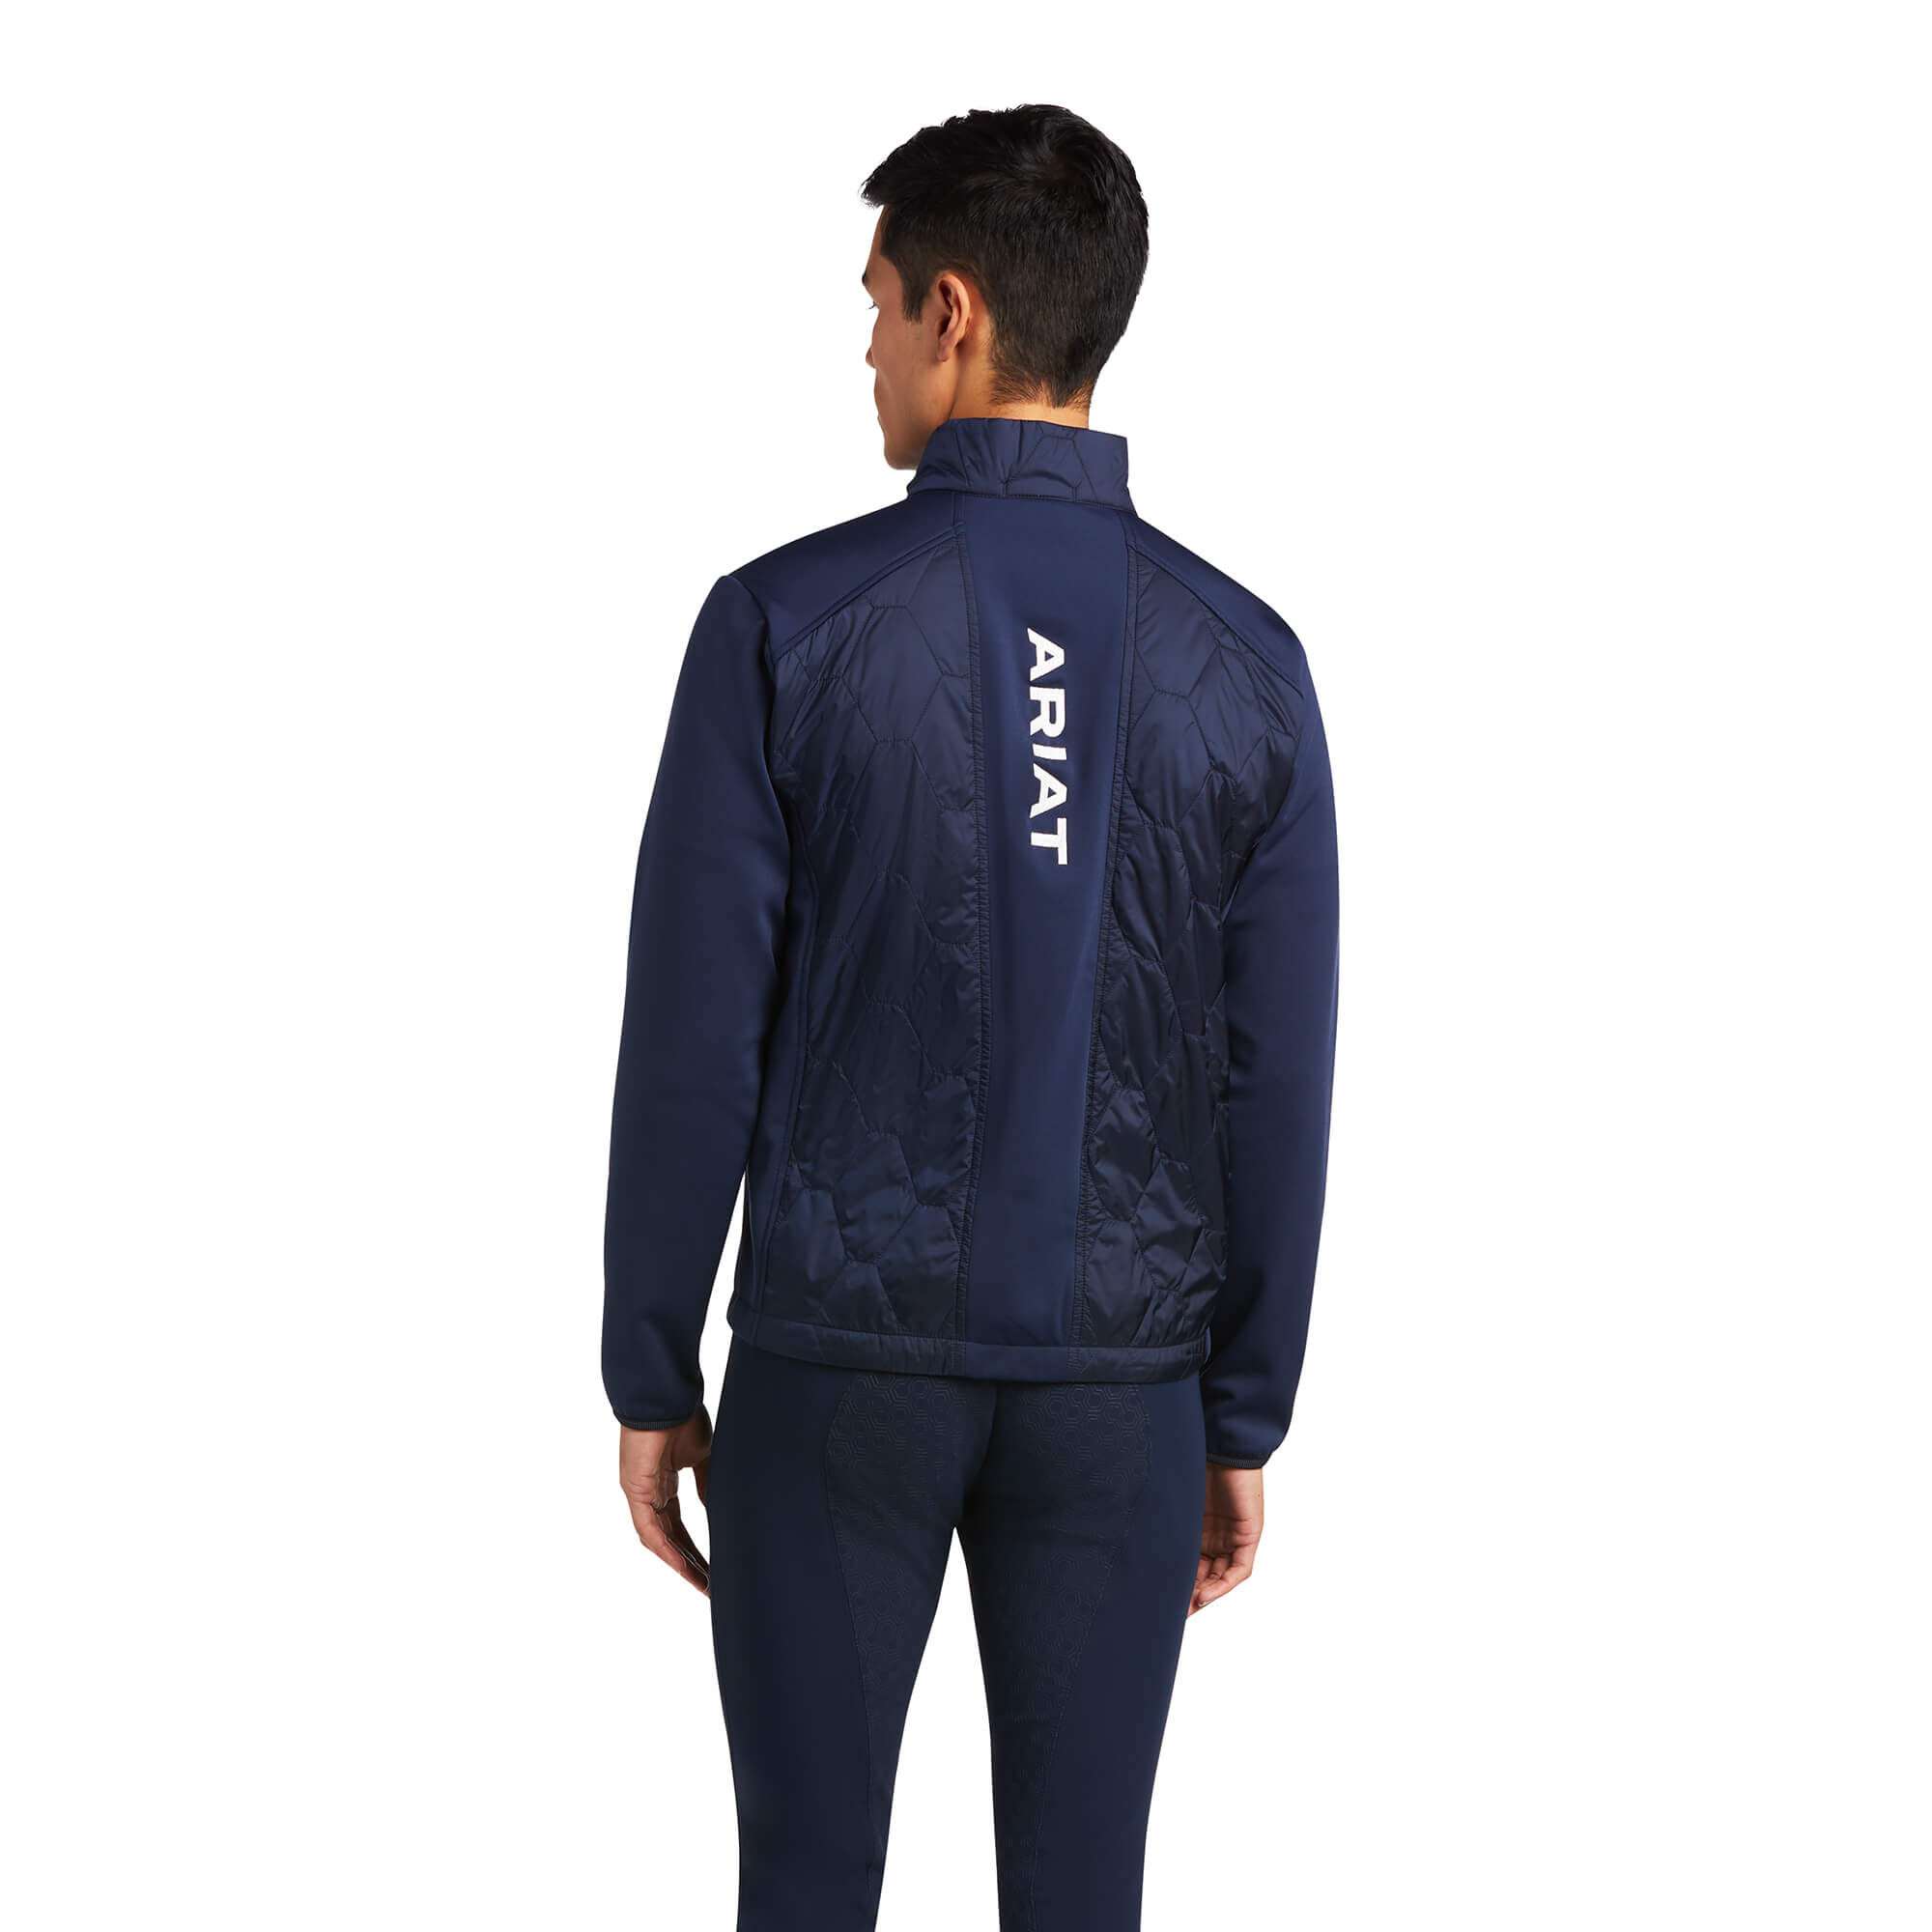 Ariat insulated fusion jacket men 